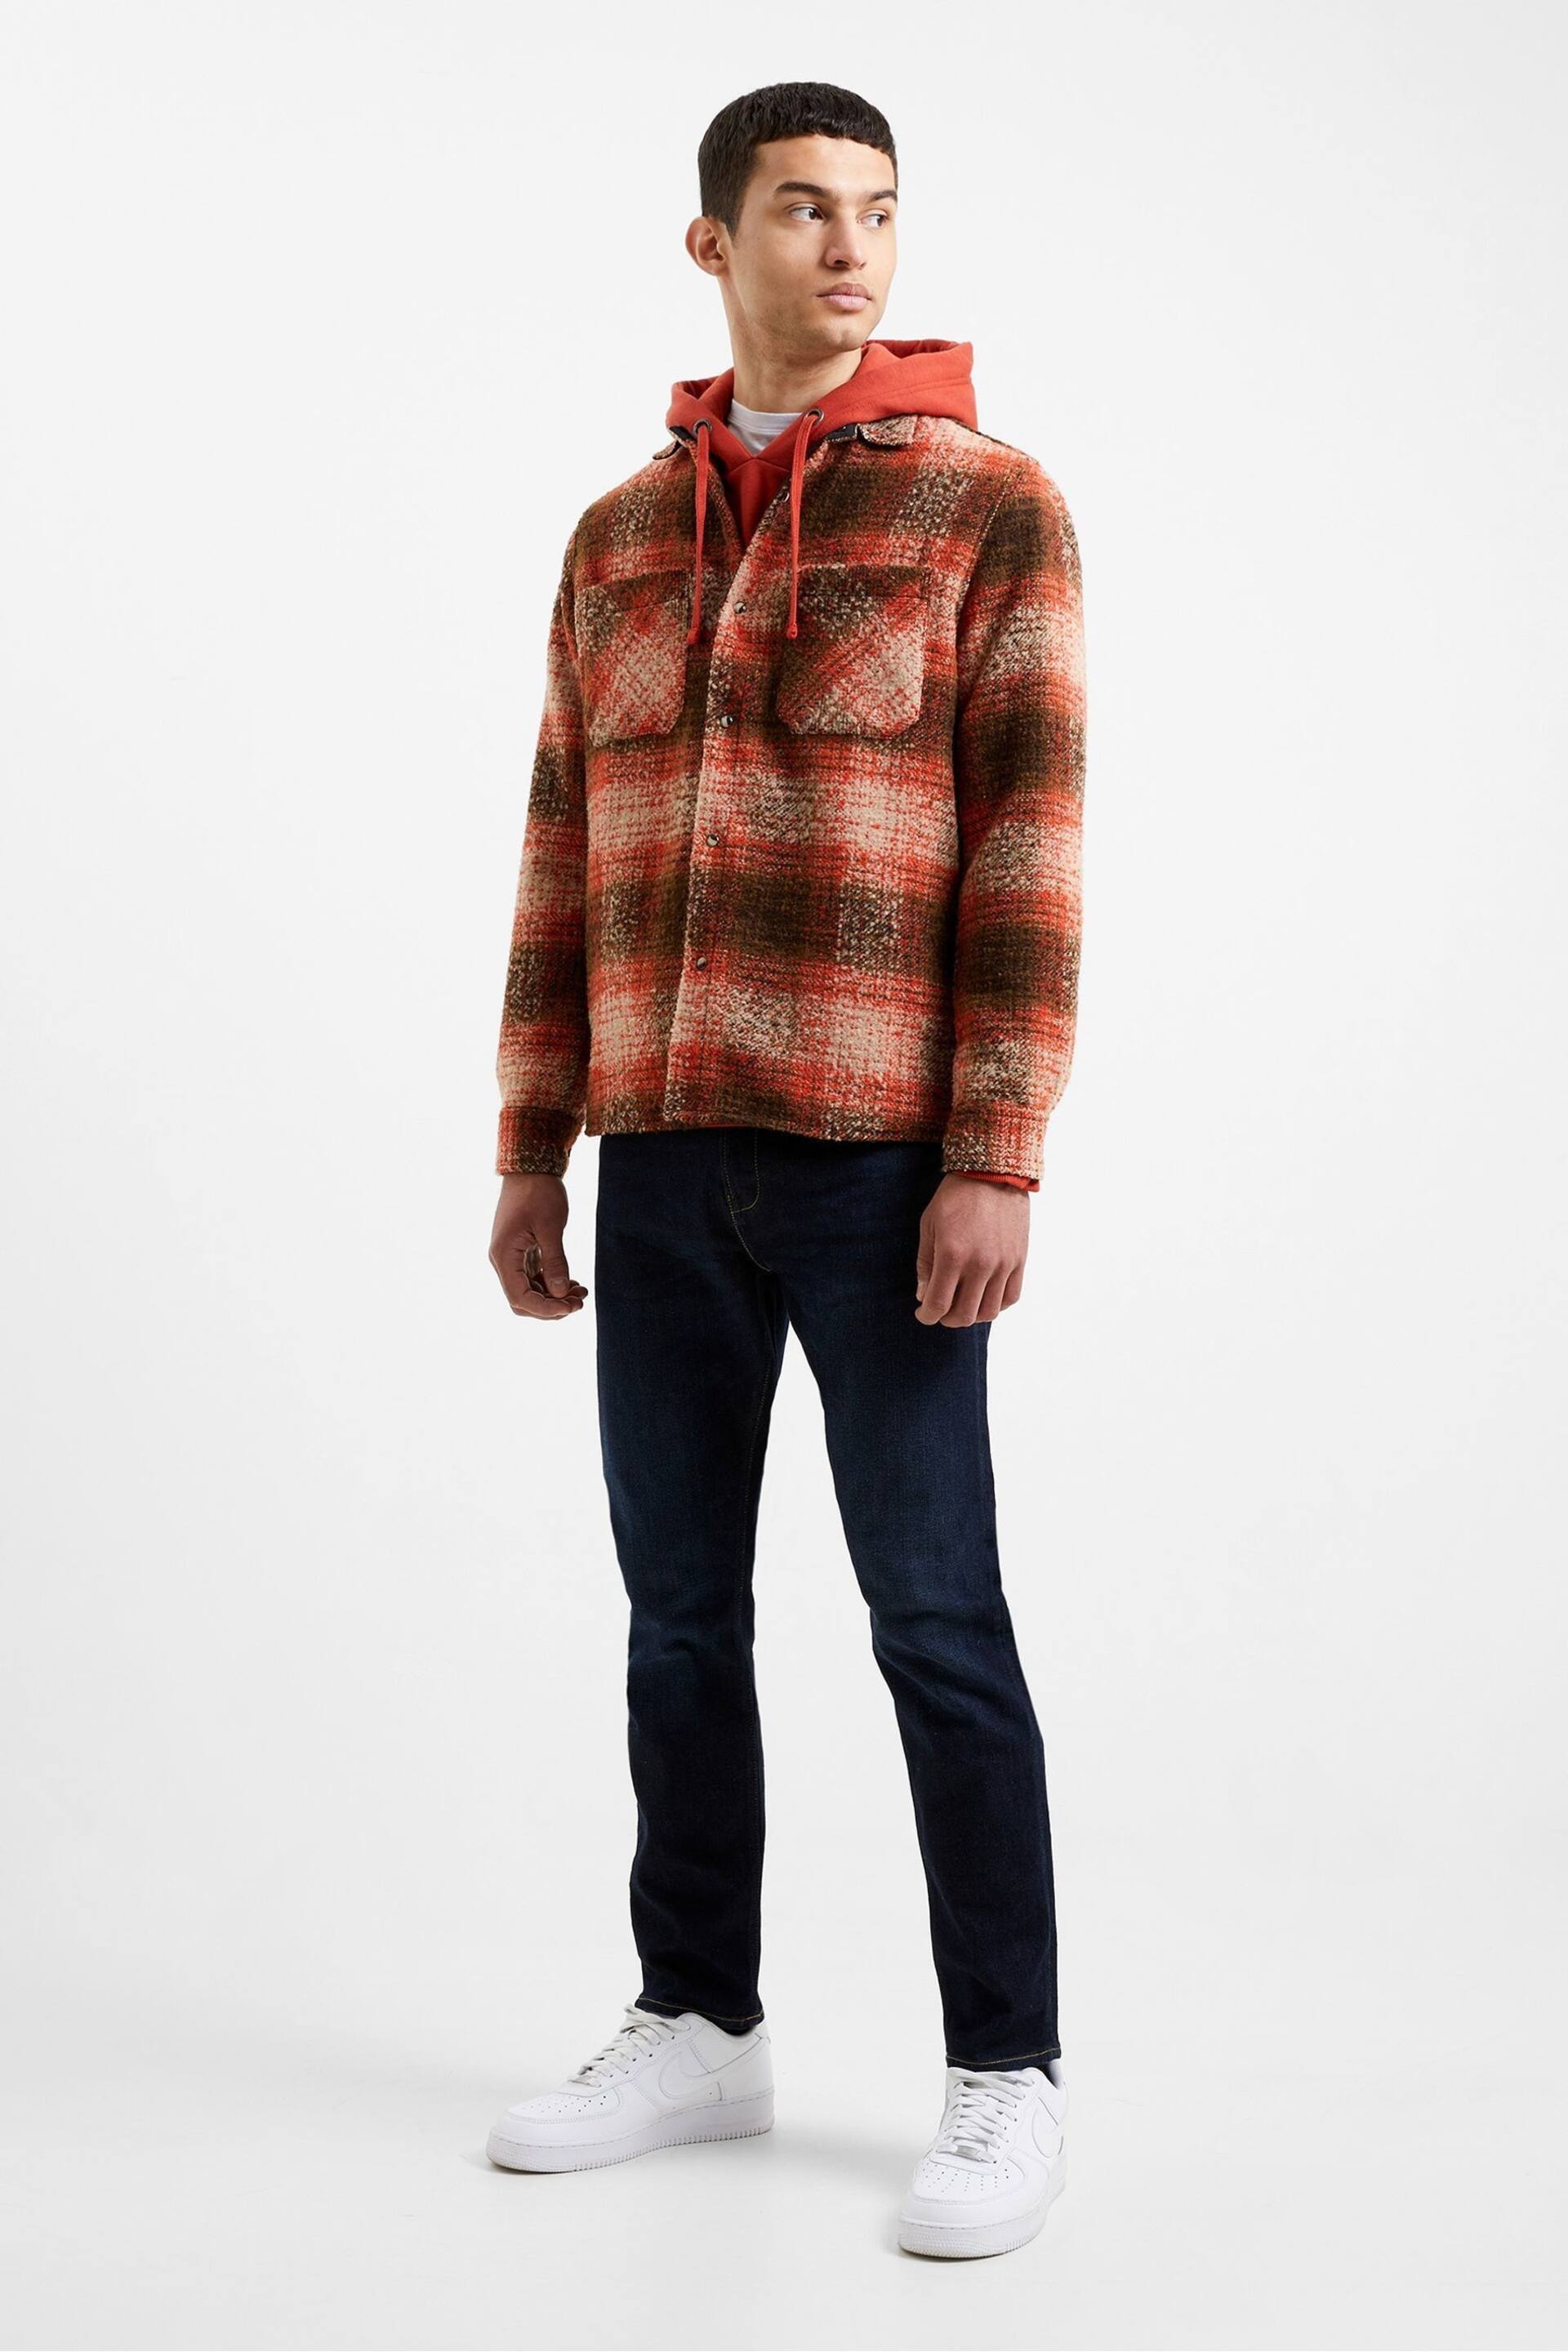 French Connection Rust Heavy Check Overshirt Long Sleeve Shirt - Image 3 of 6